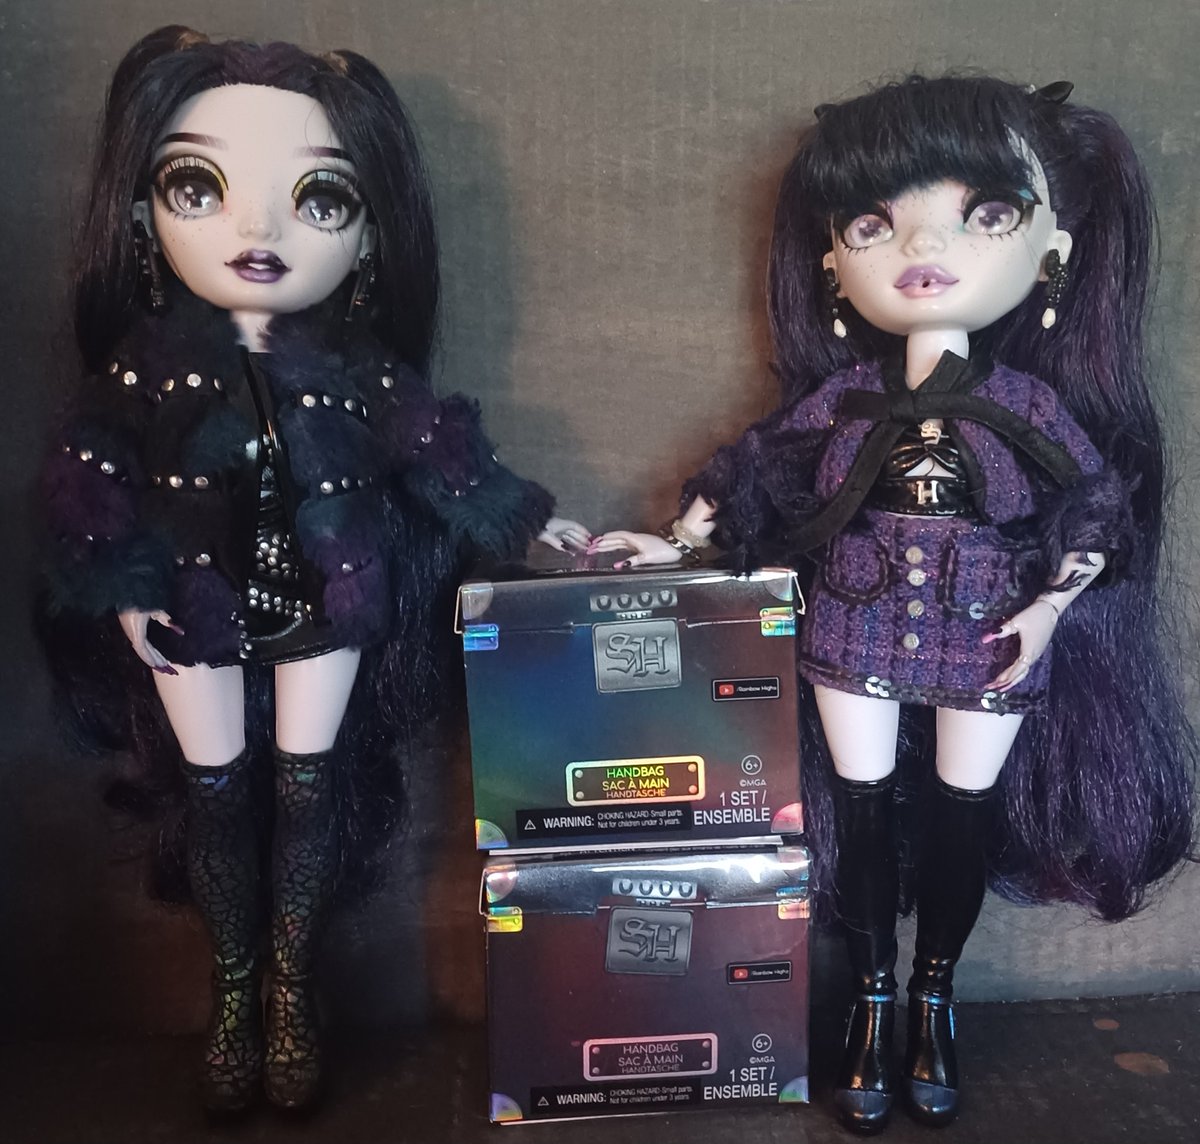 I went to Walmart earlier and got something for N and V and their friends! The blind boxes are still $5 at my Walmart, but I didn't have the blind box Shadow High handbags yet. They will be sure to unbox them and show everyone what they got!🖤💜